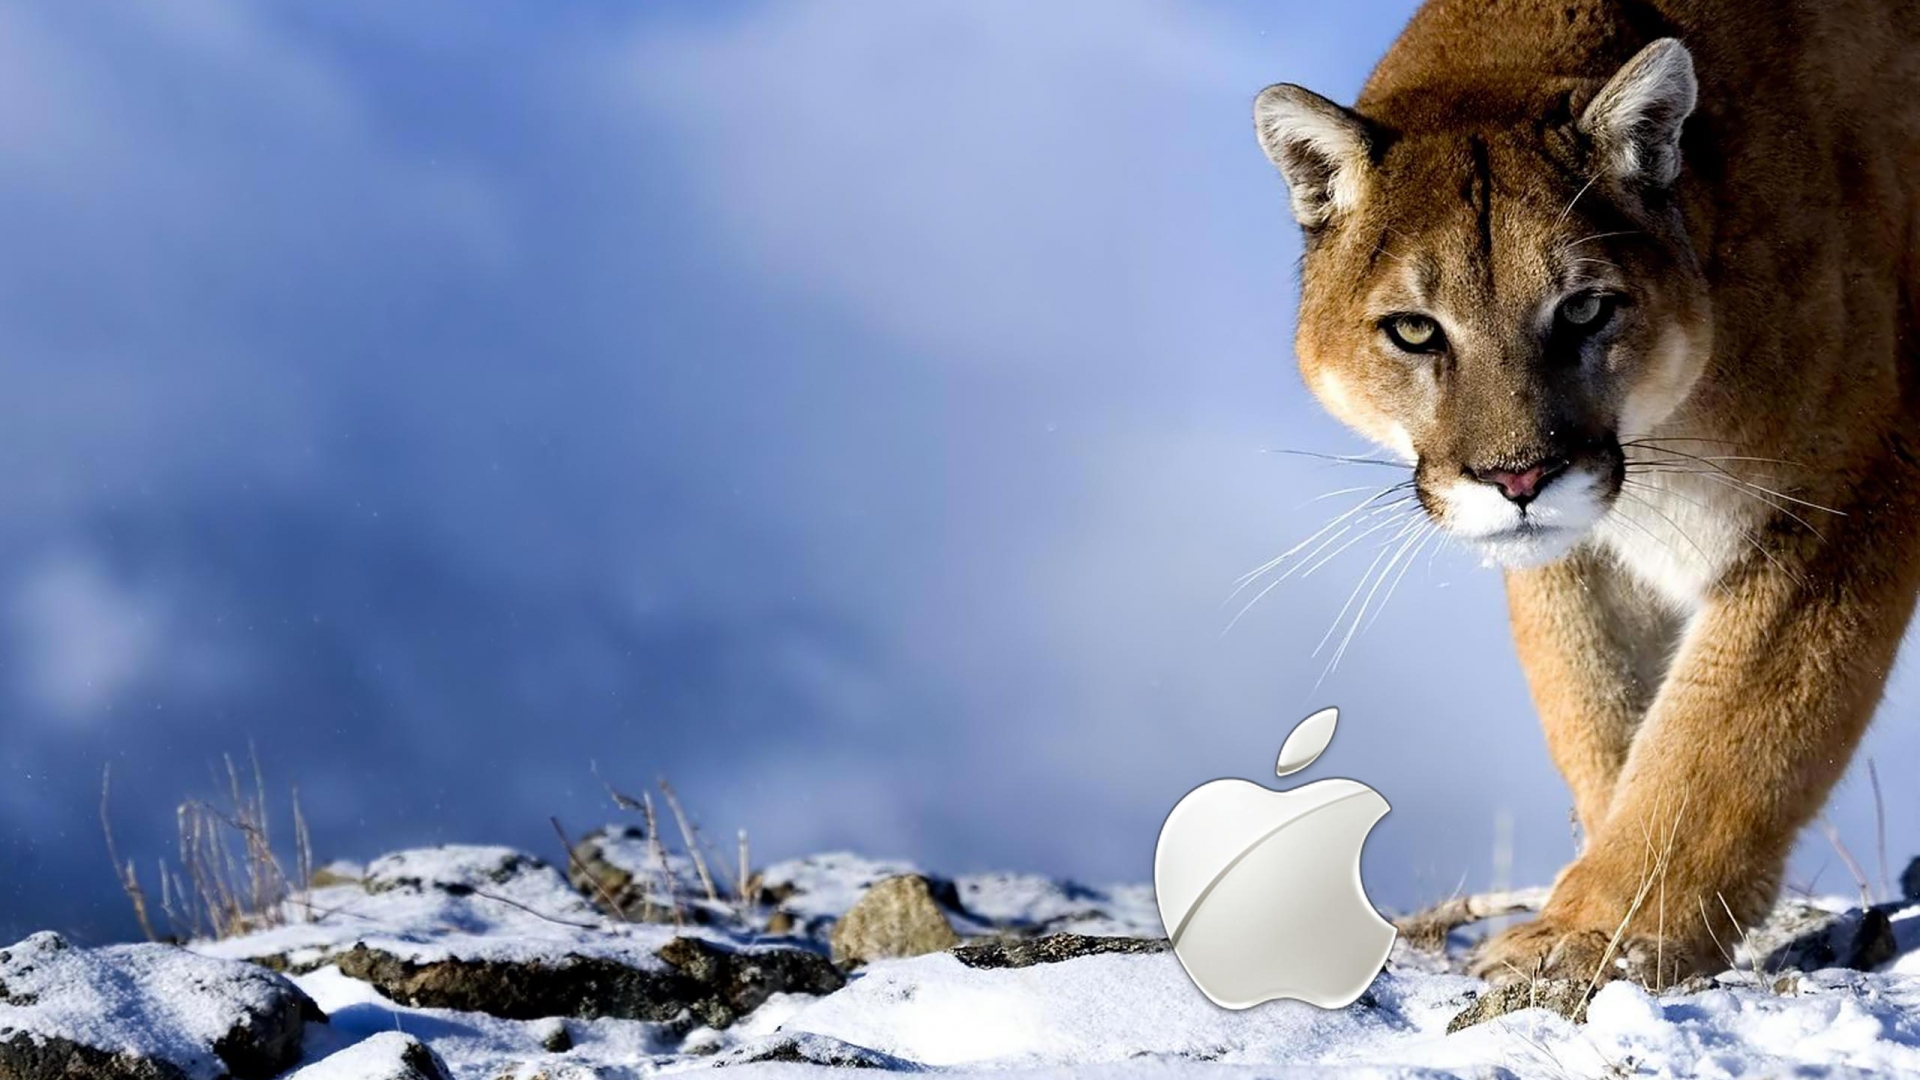 Apple Hd Wallpaper Collection For Free Download - Animal Background Pictures For Desktop - HD Wallpaper 